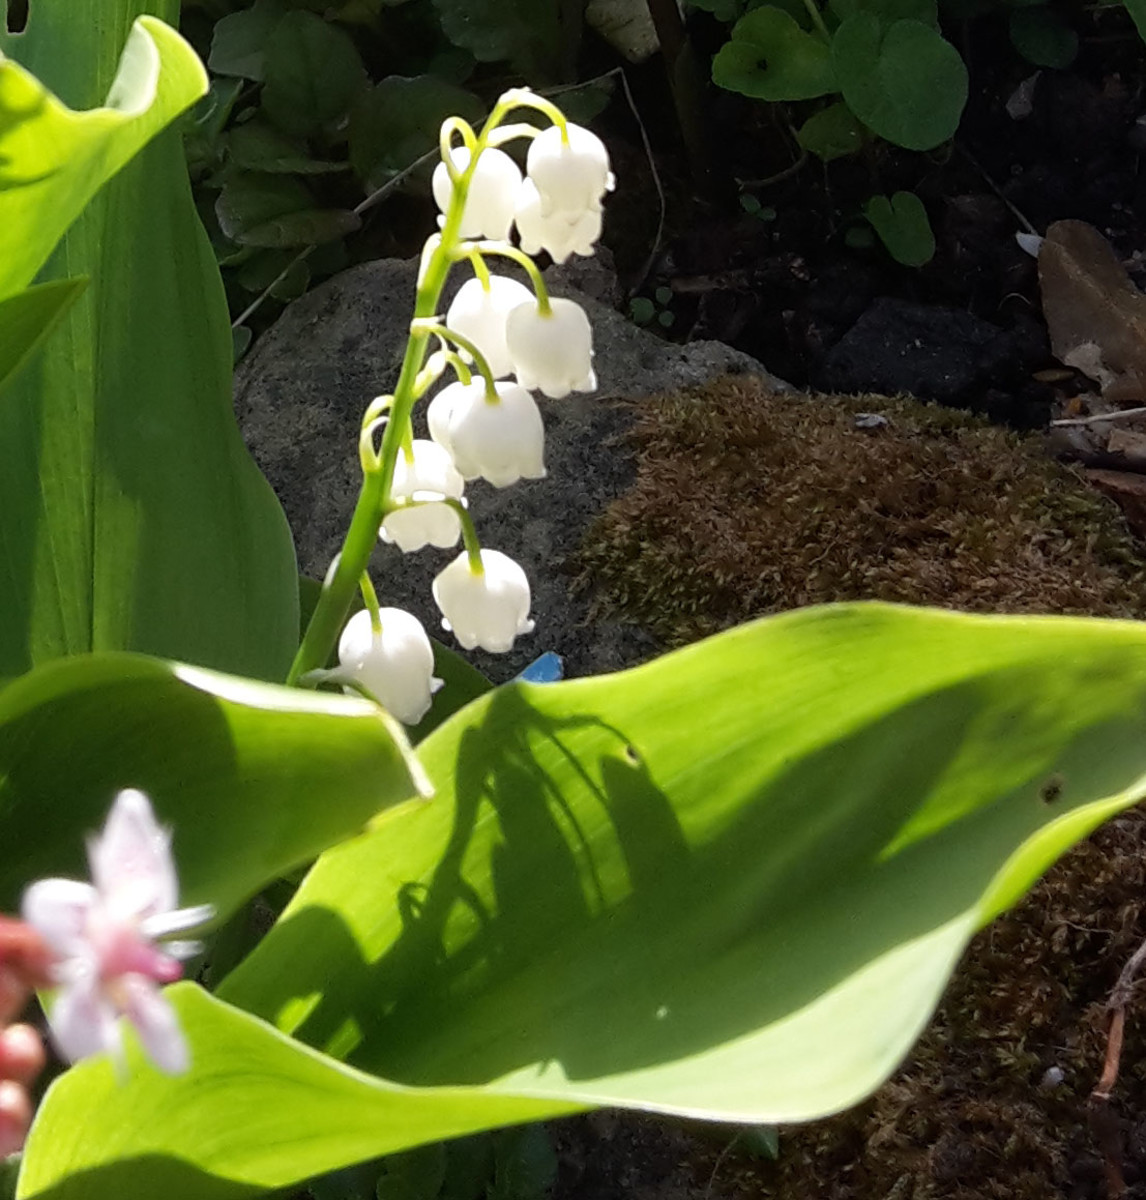 The delicate Lily-of-the-Valley provides beautiful blooms in the spring.